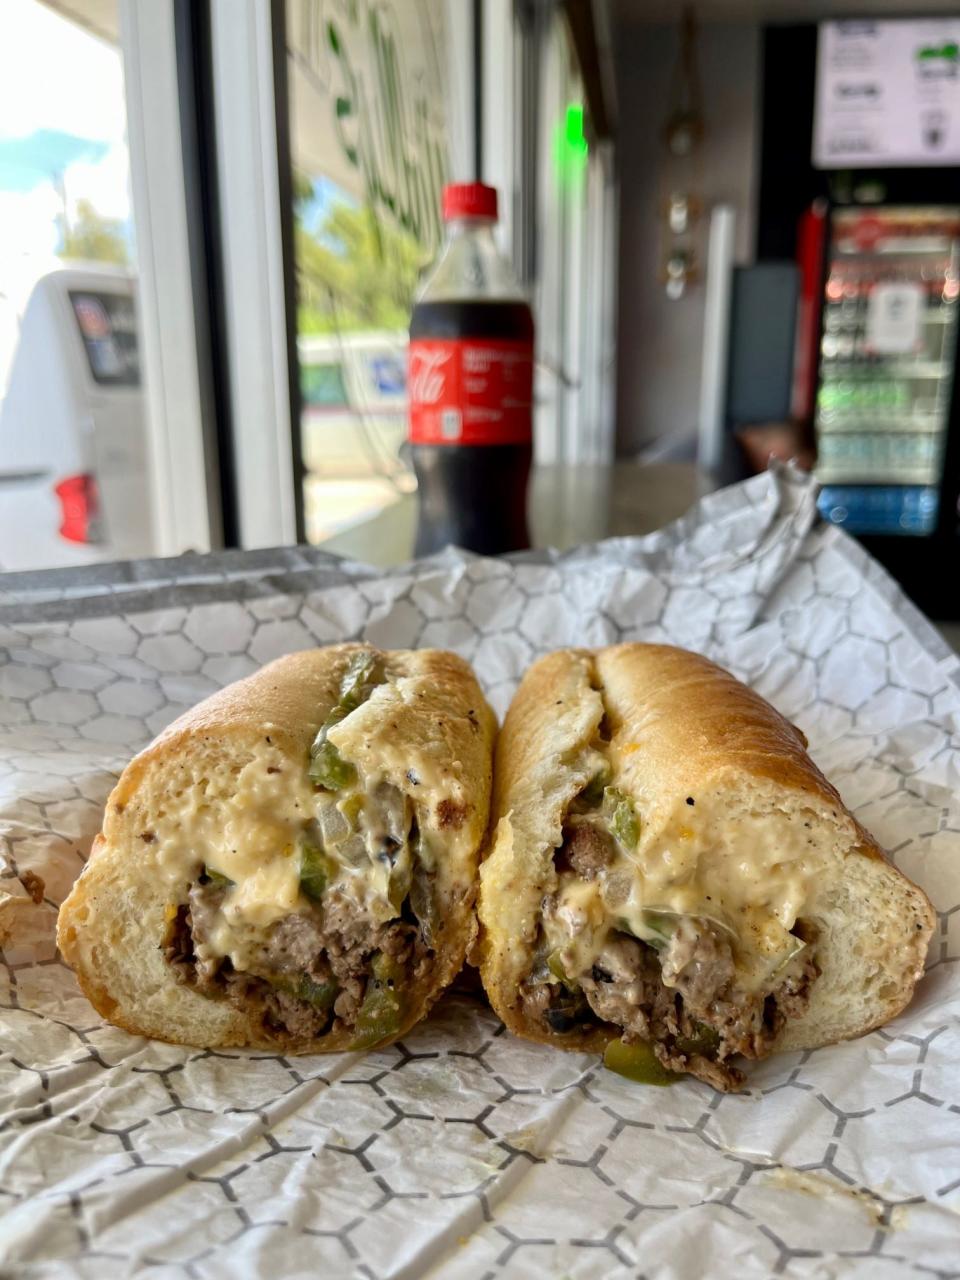 The made-fresh daily five-cheese cheese sauce makes this cheesesteak at Wally's Deli one of our favorites.